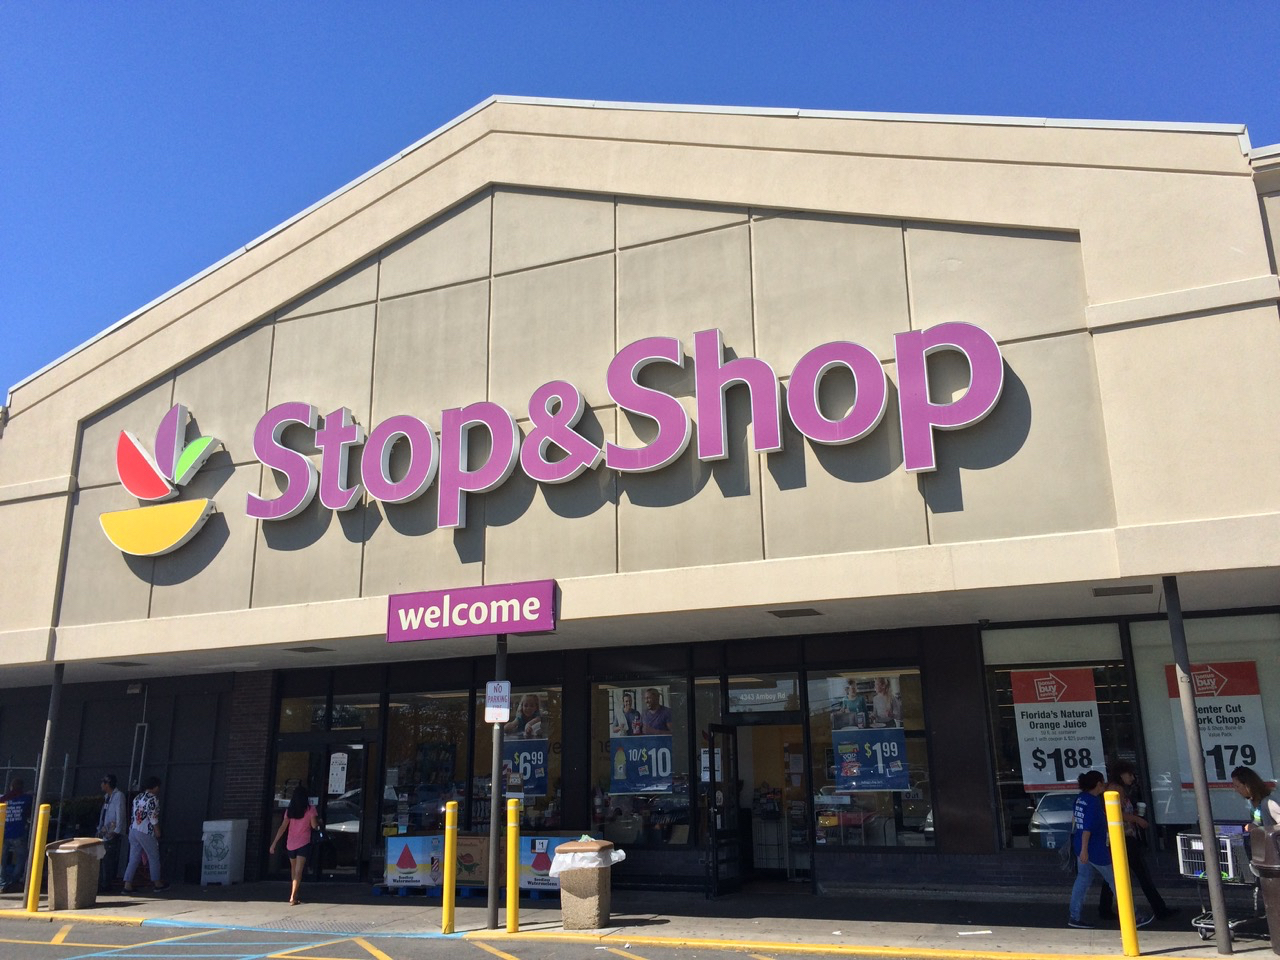 stop and shop nj